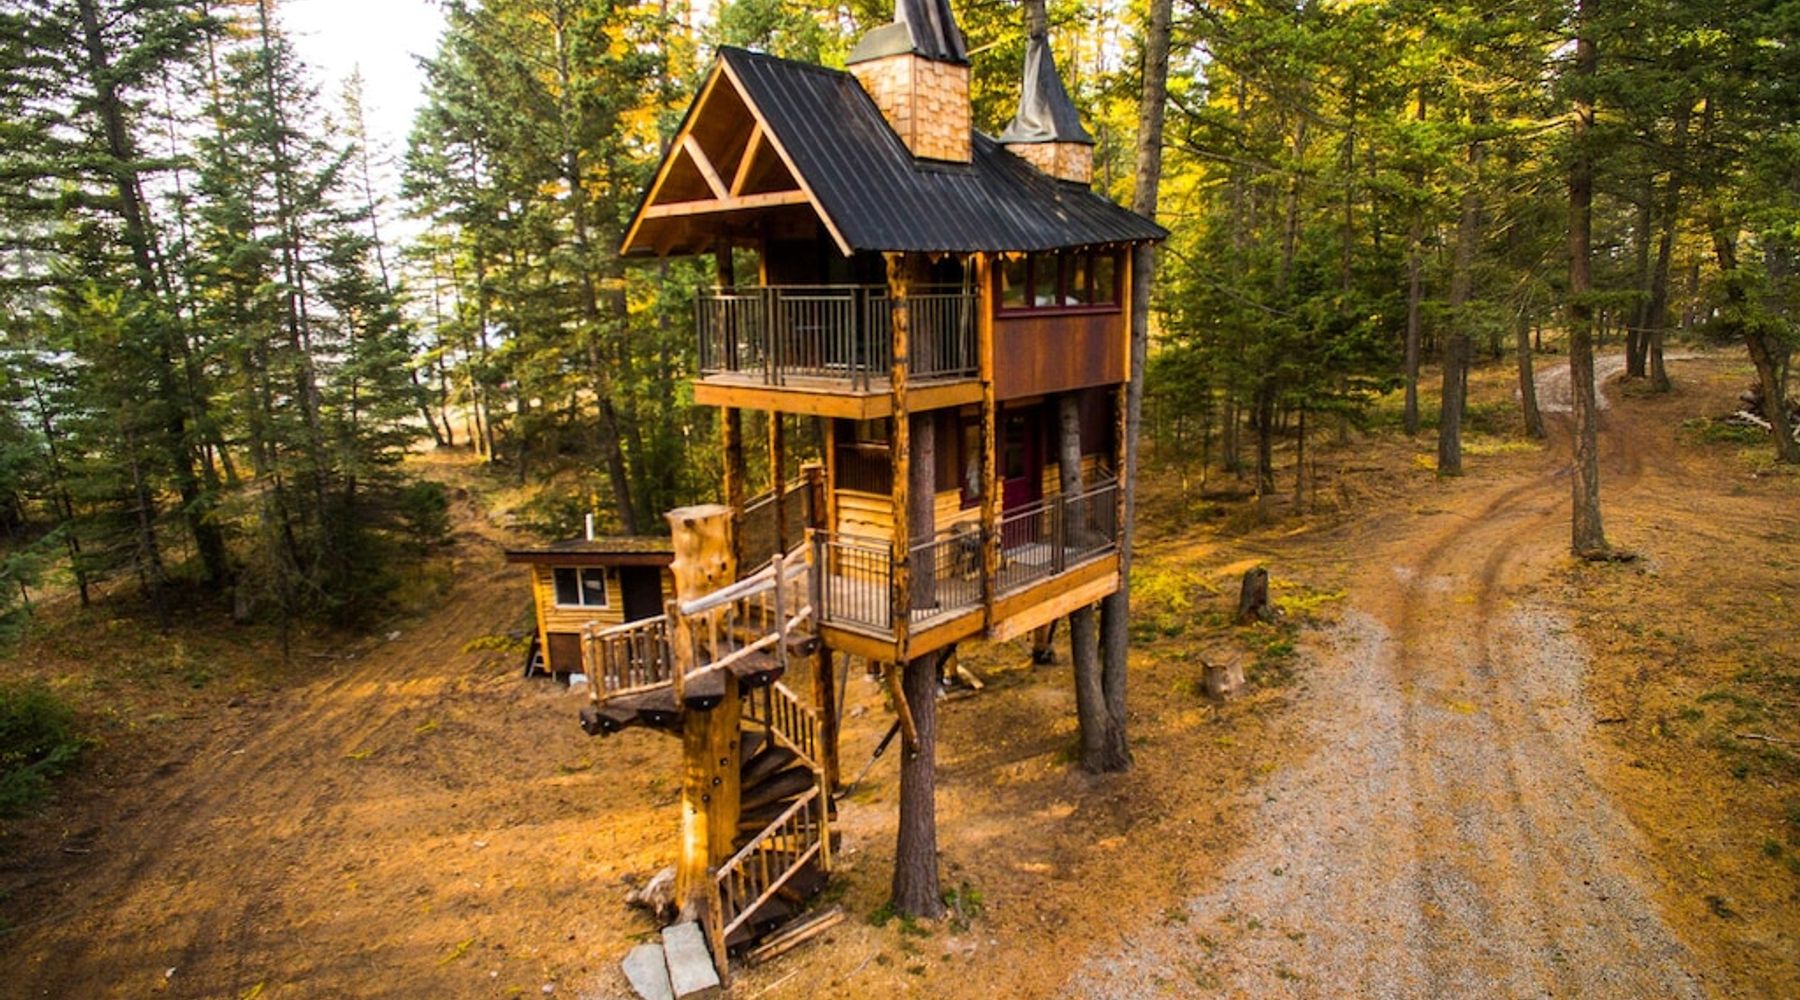 The Best Treehouses In The US

6. Meadowlark Treehouse at Montana Treehouse Retreat

Location: Columbia Falls, Montana